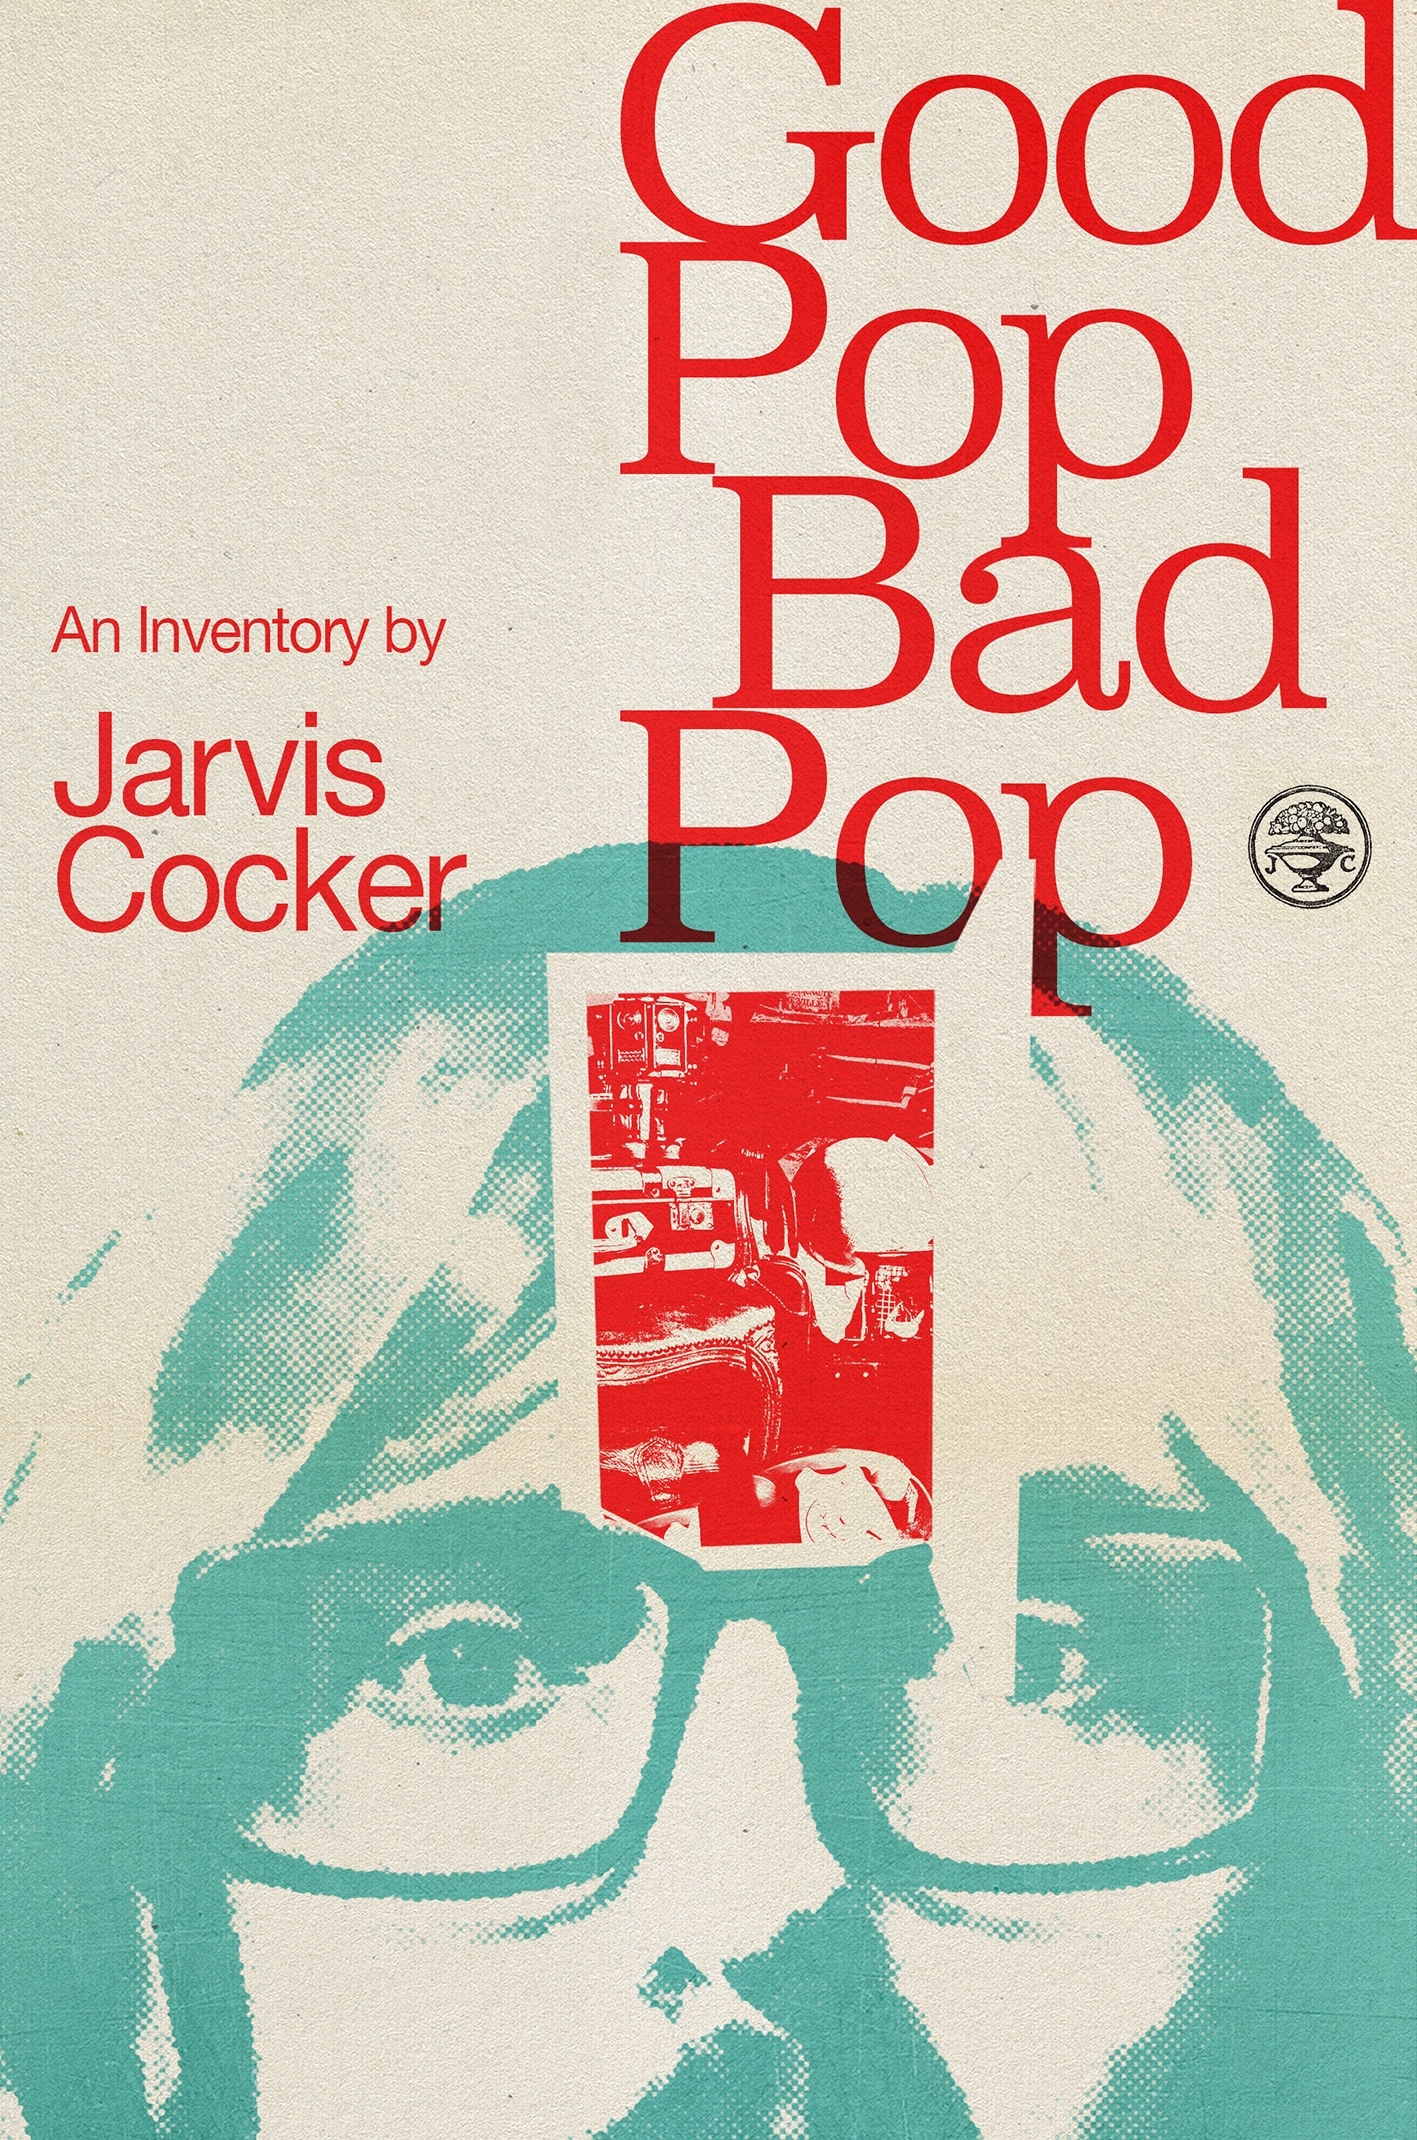 Book “Good Pop, Bad Pop” by Jarvis Cocker — May 26, 2022